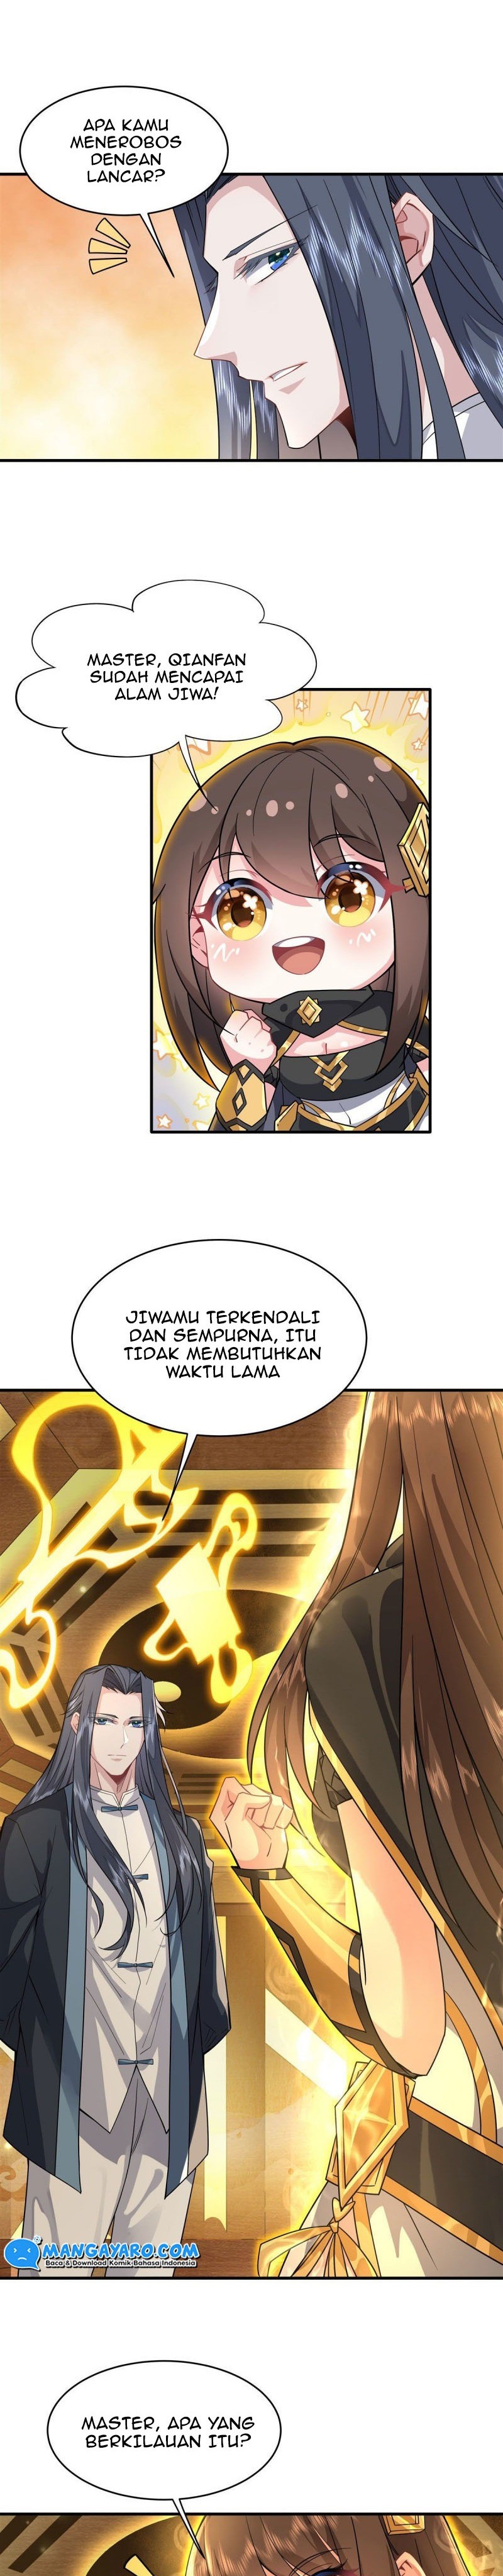 Dilarang COPAS - situs resmi www.mangacanblog.com - Komik my female apprentices are all big shots from the future 031 - chapter 31 32 Indonesia my female apprentices are all big shots from the future 031 - chapter 31 Terbaru 14|Baca Manga Komik Indonesia|Mangacan